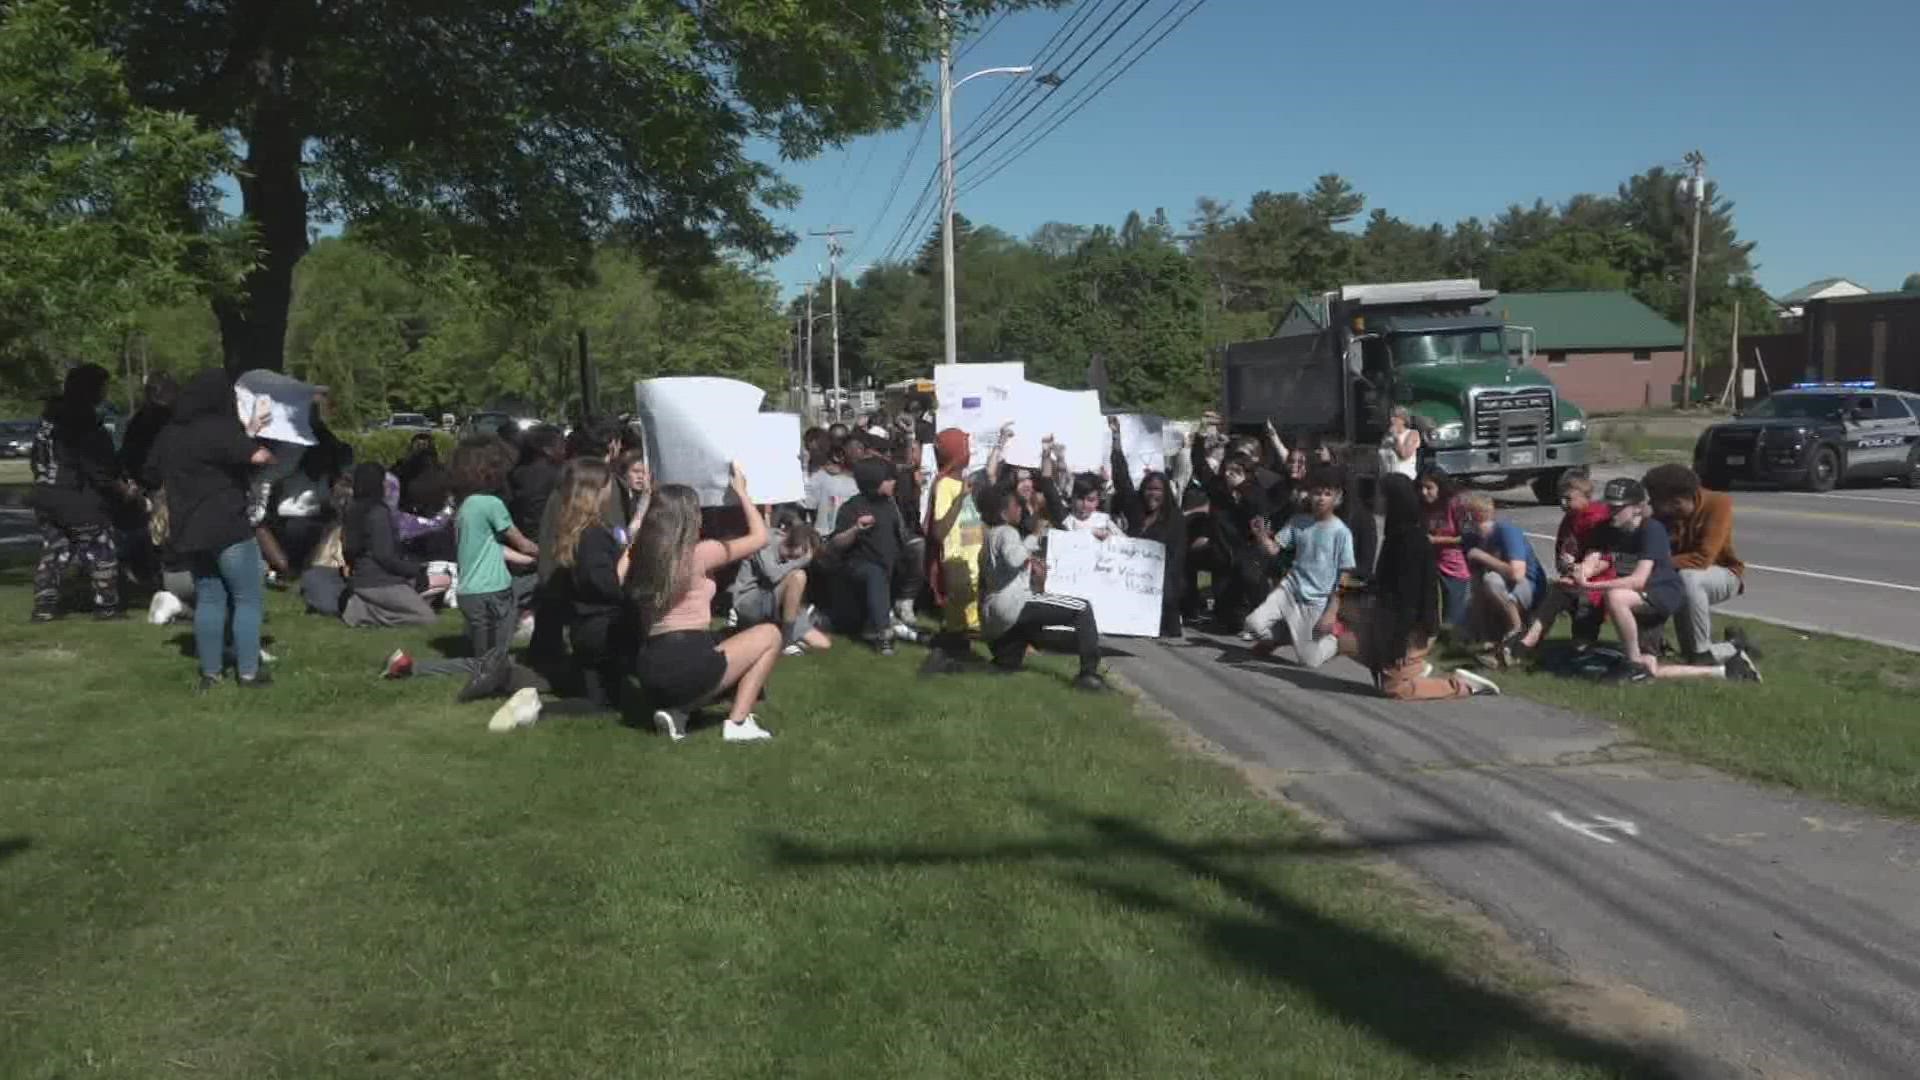 Dozens of Westbrook middle and high school students protested on Monday, June 4 in response to an incident at the Westbrook Together Days festival.